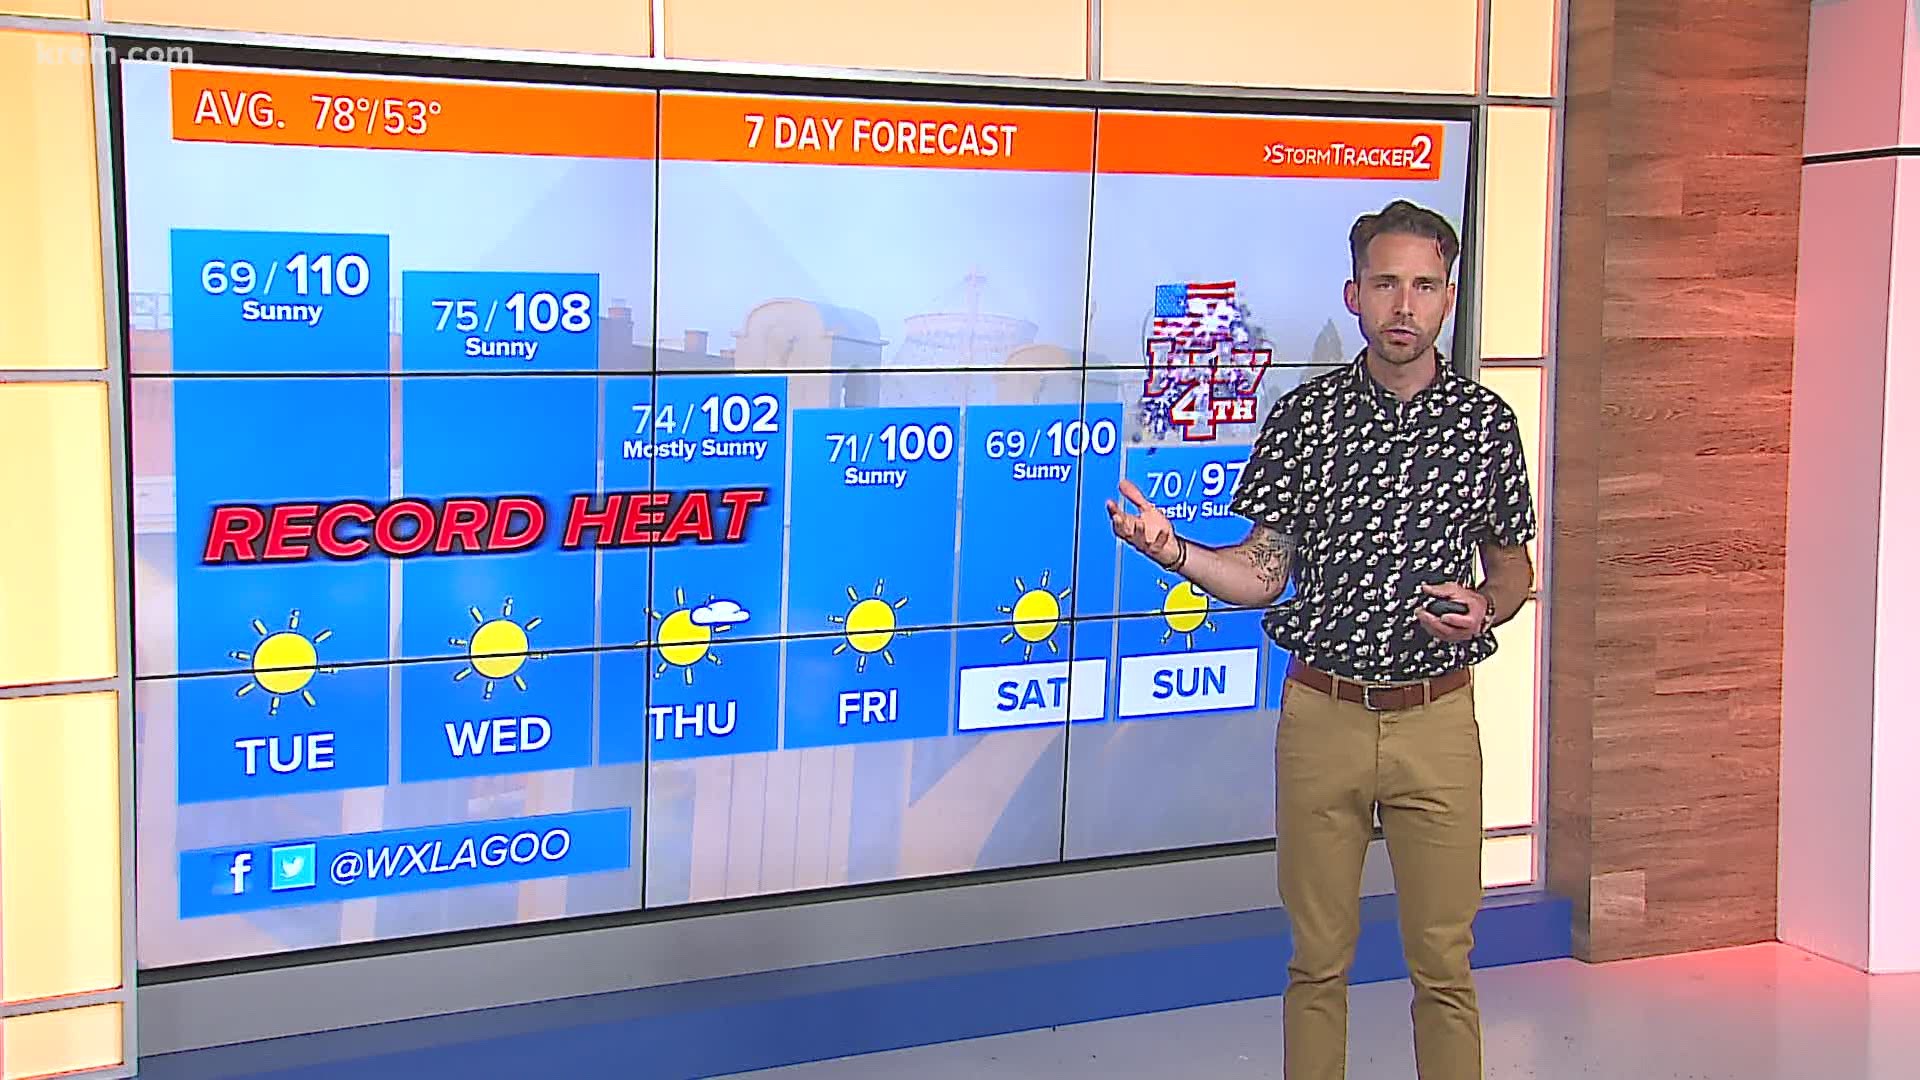 Historic heat wave coverage continues